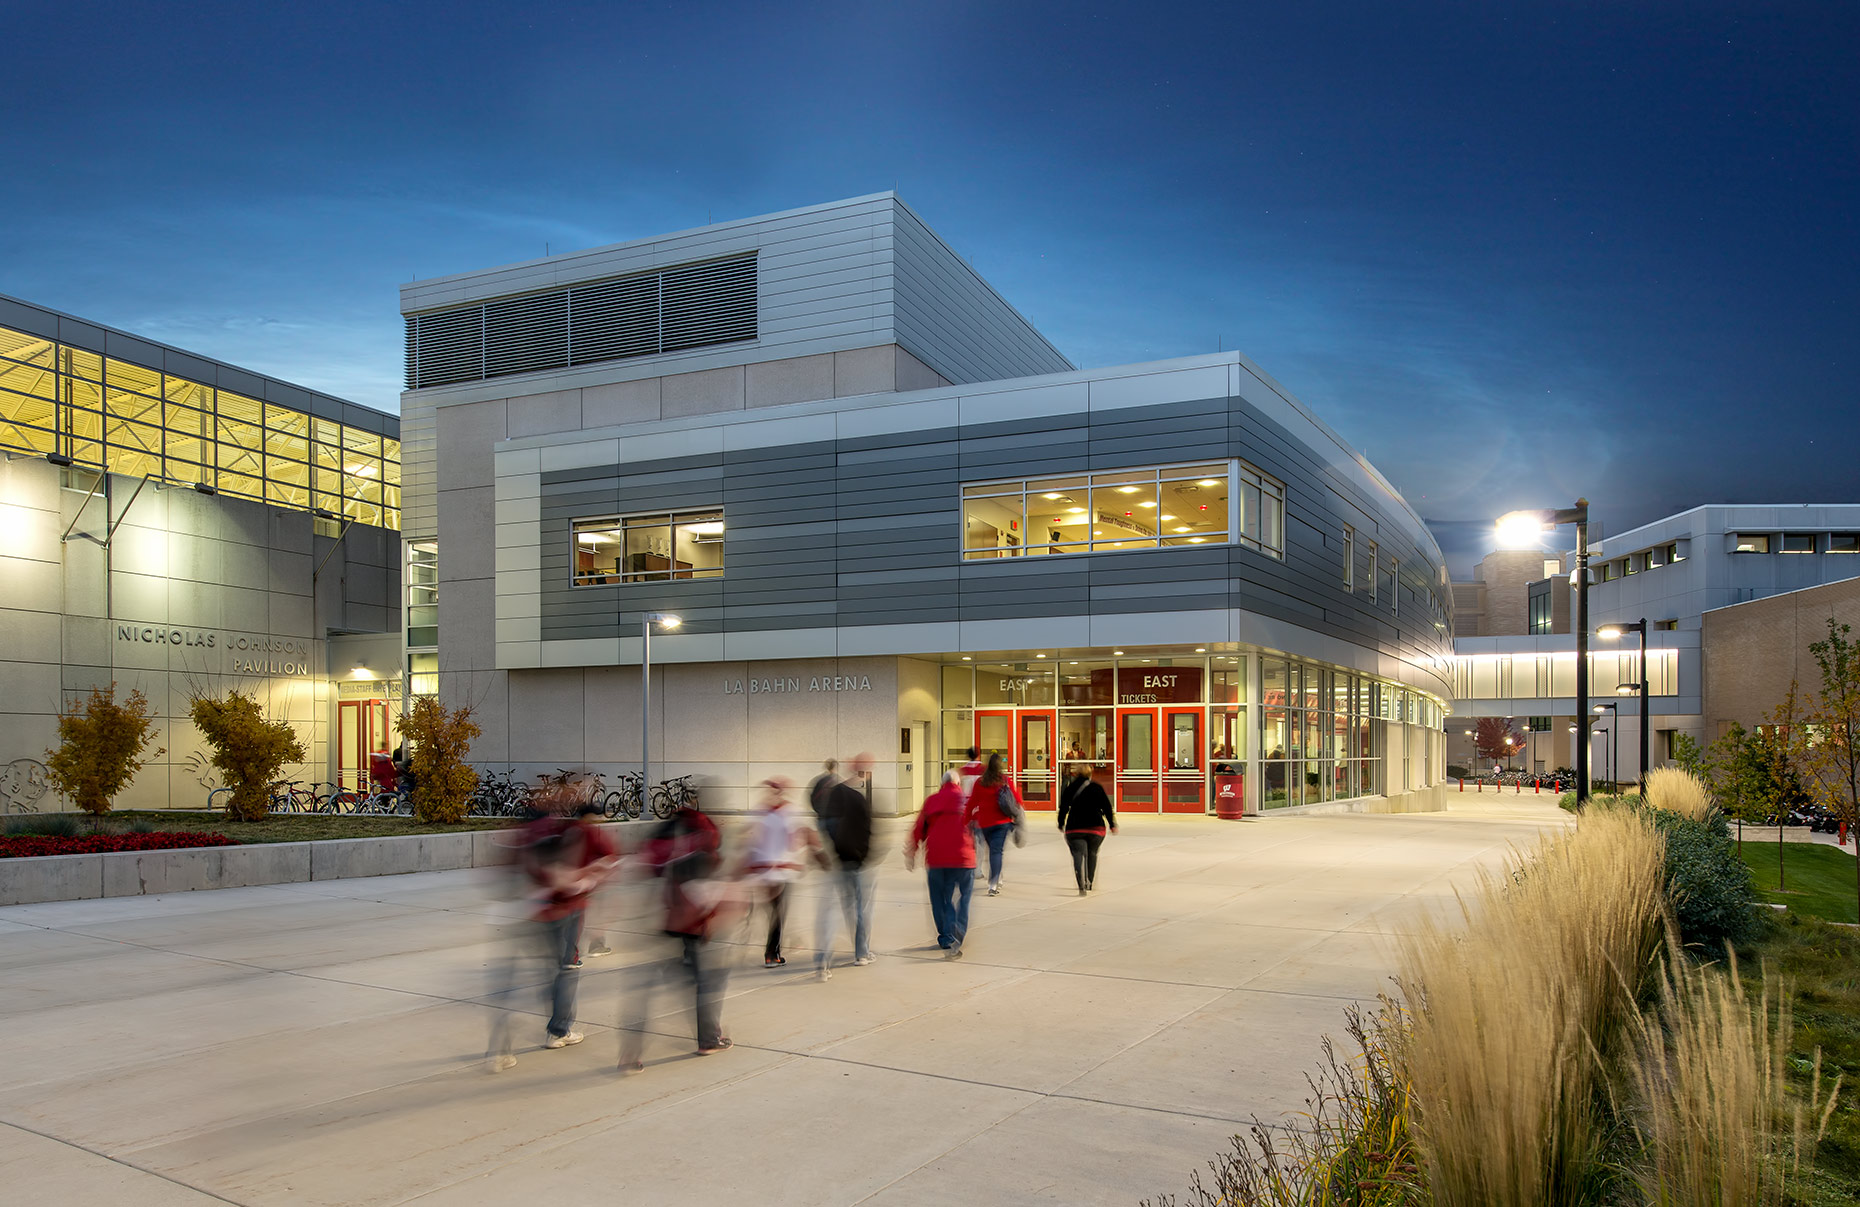 LaBahn ice hockey arena for the Wisconsin Badgers at University of Wisconsin-Madison